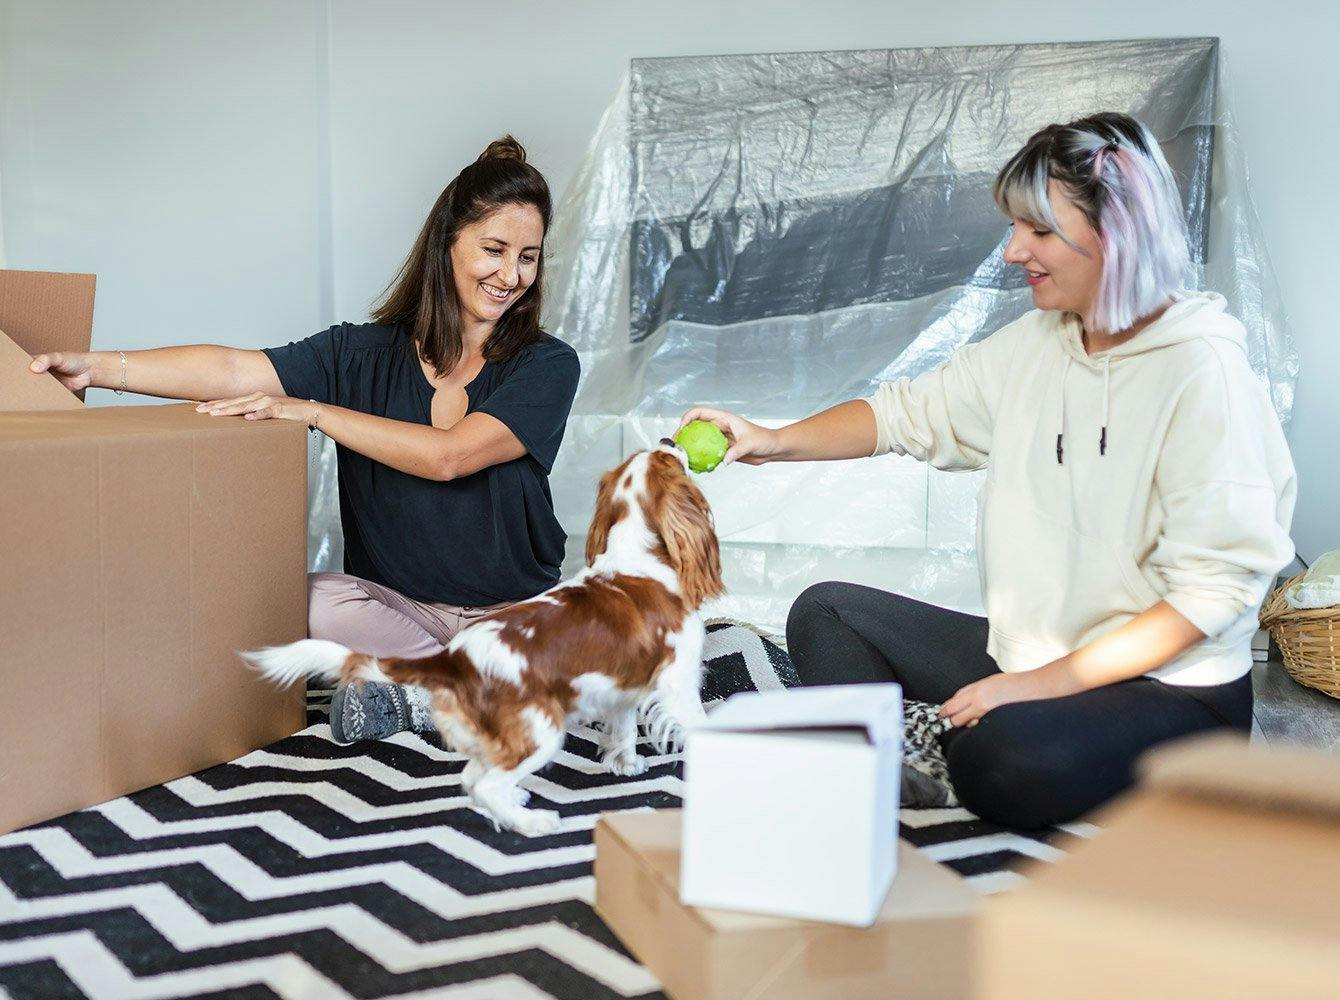 two women unpacking and playing with a dog